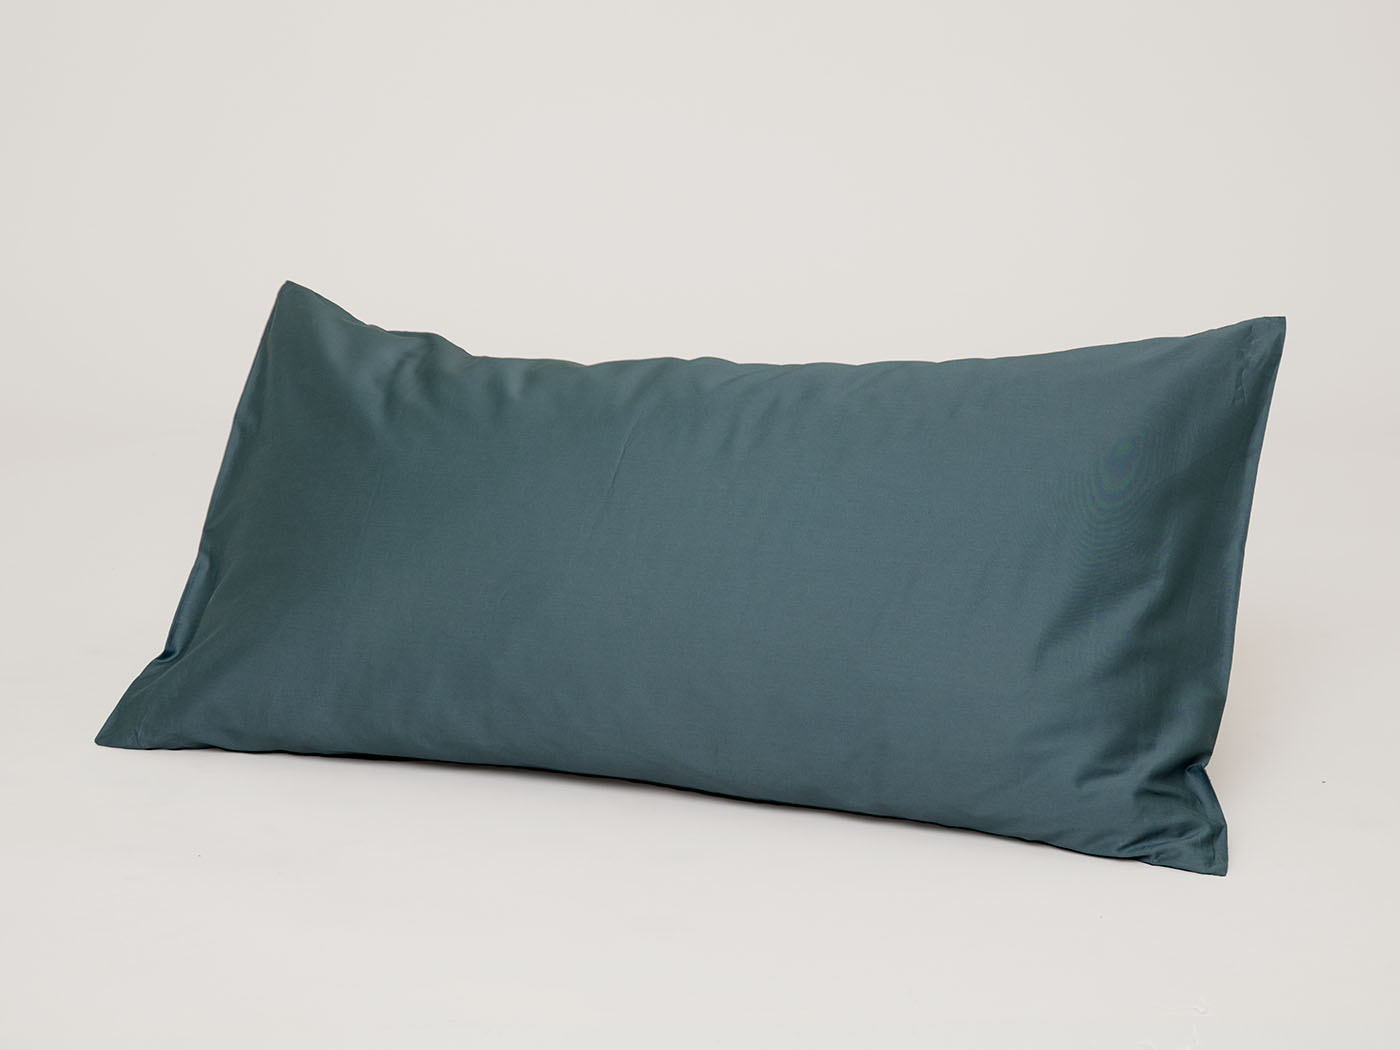 Pillowcase Fond - Washd Bottle Green - 50x90 cm in the group Bedding / Pillowcases at A L V A (1053)